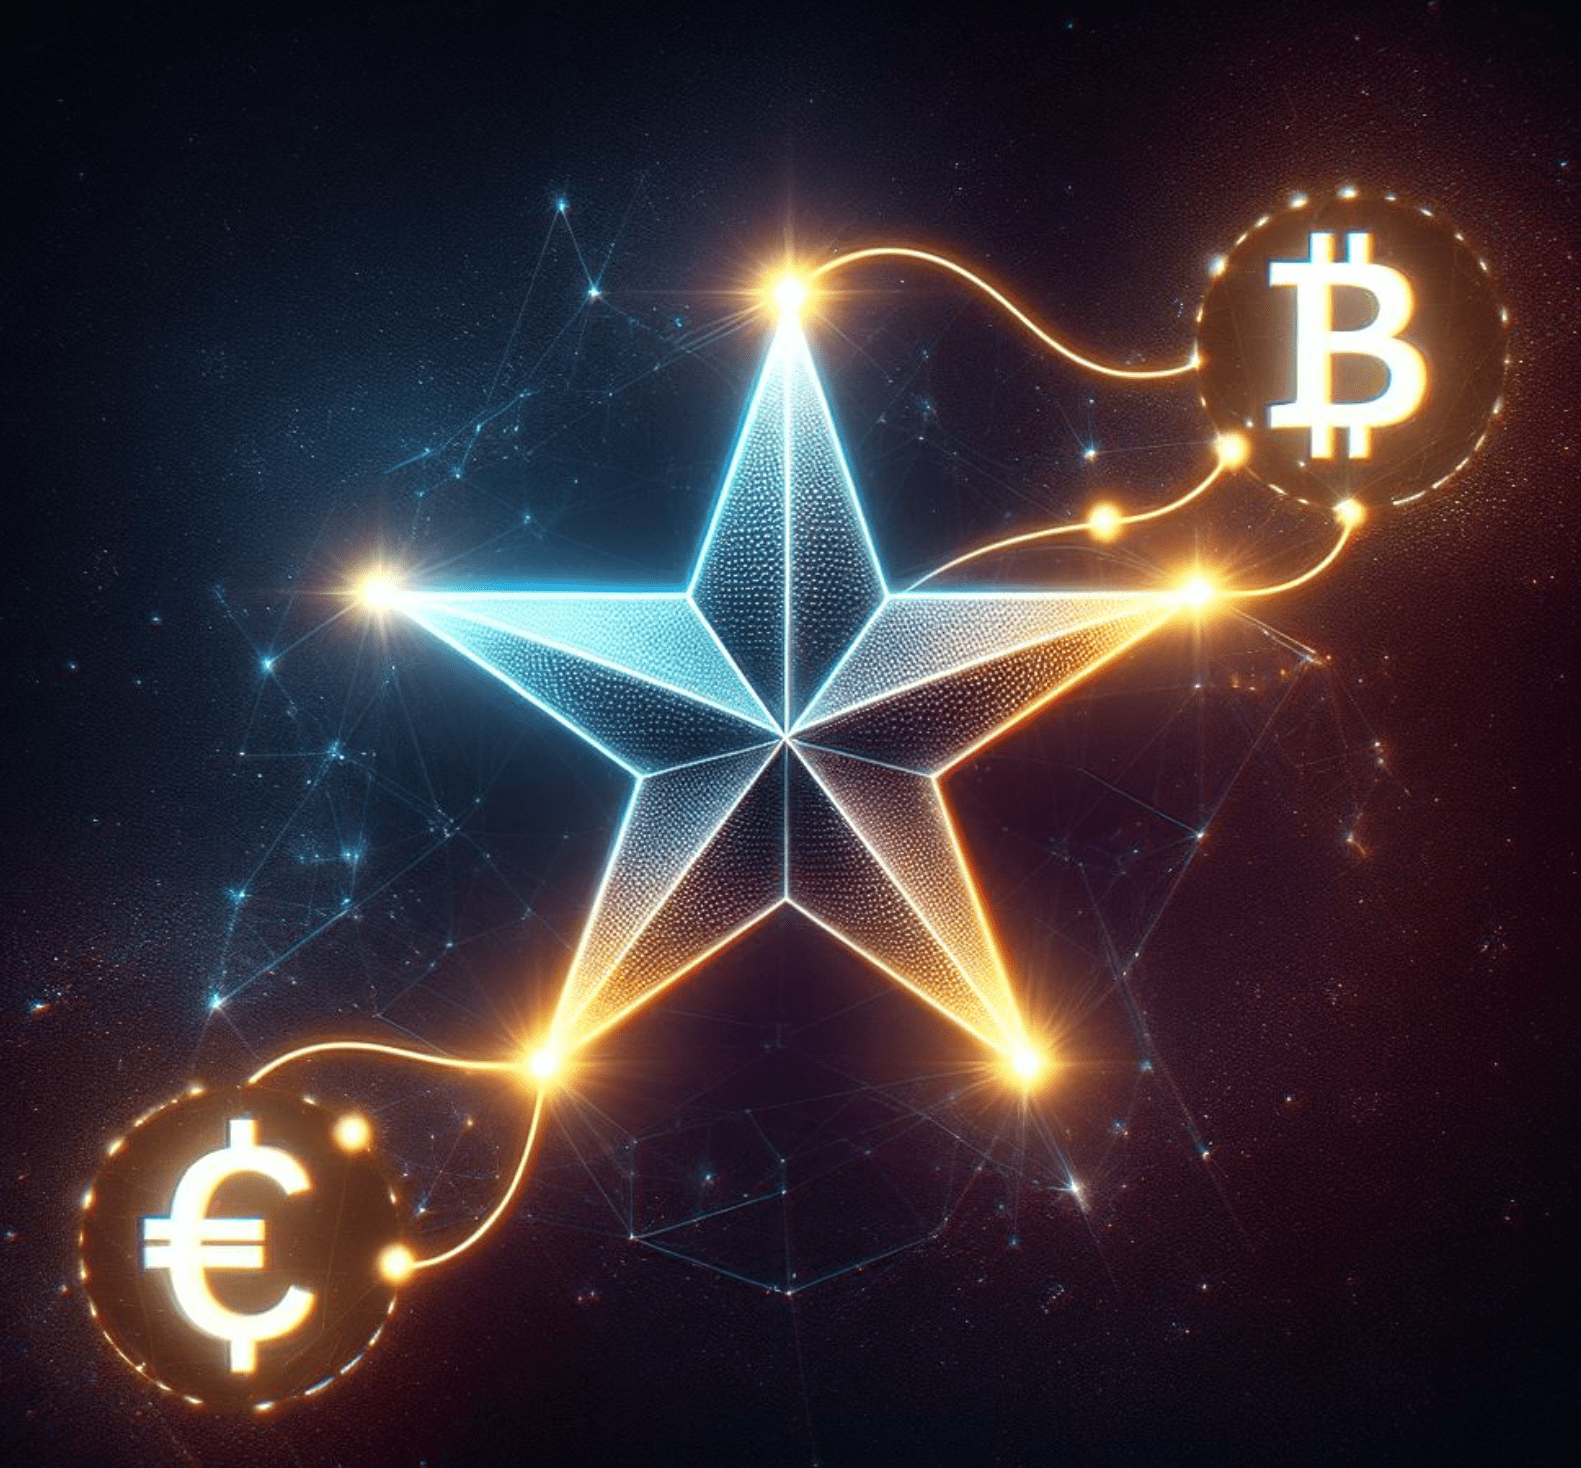 Consider a captivating thumbnail featuring a stylized star (representing Stellar) with a trail of interconnected currency symbols (USD, EUR, BTC) leading toward it.